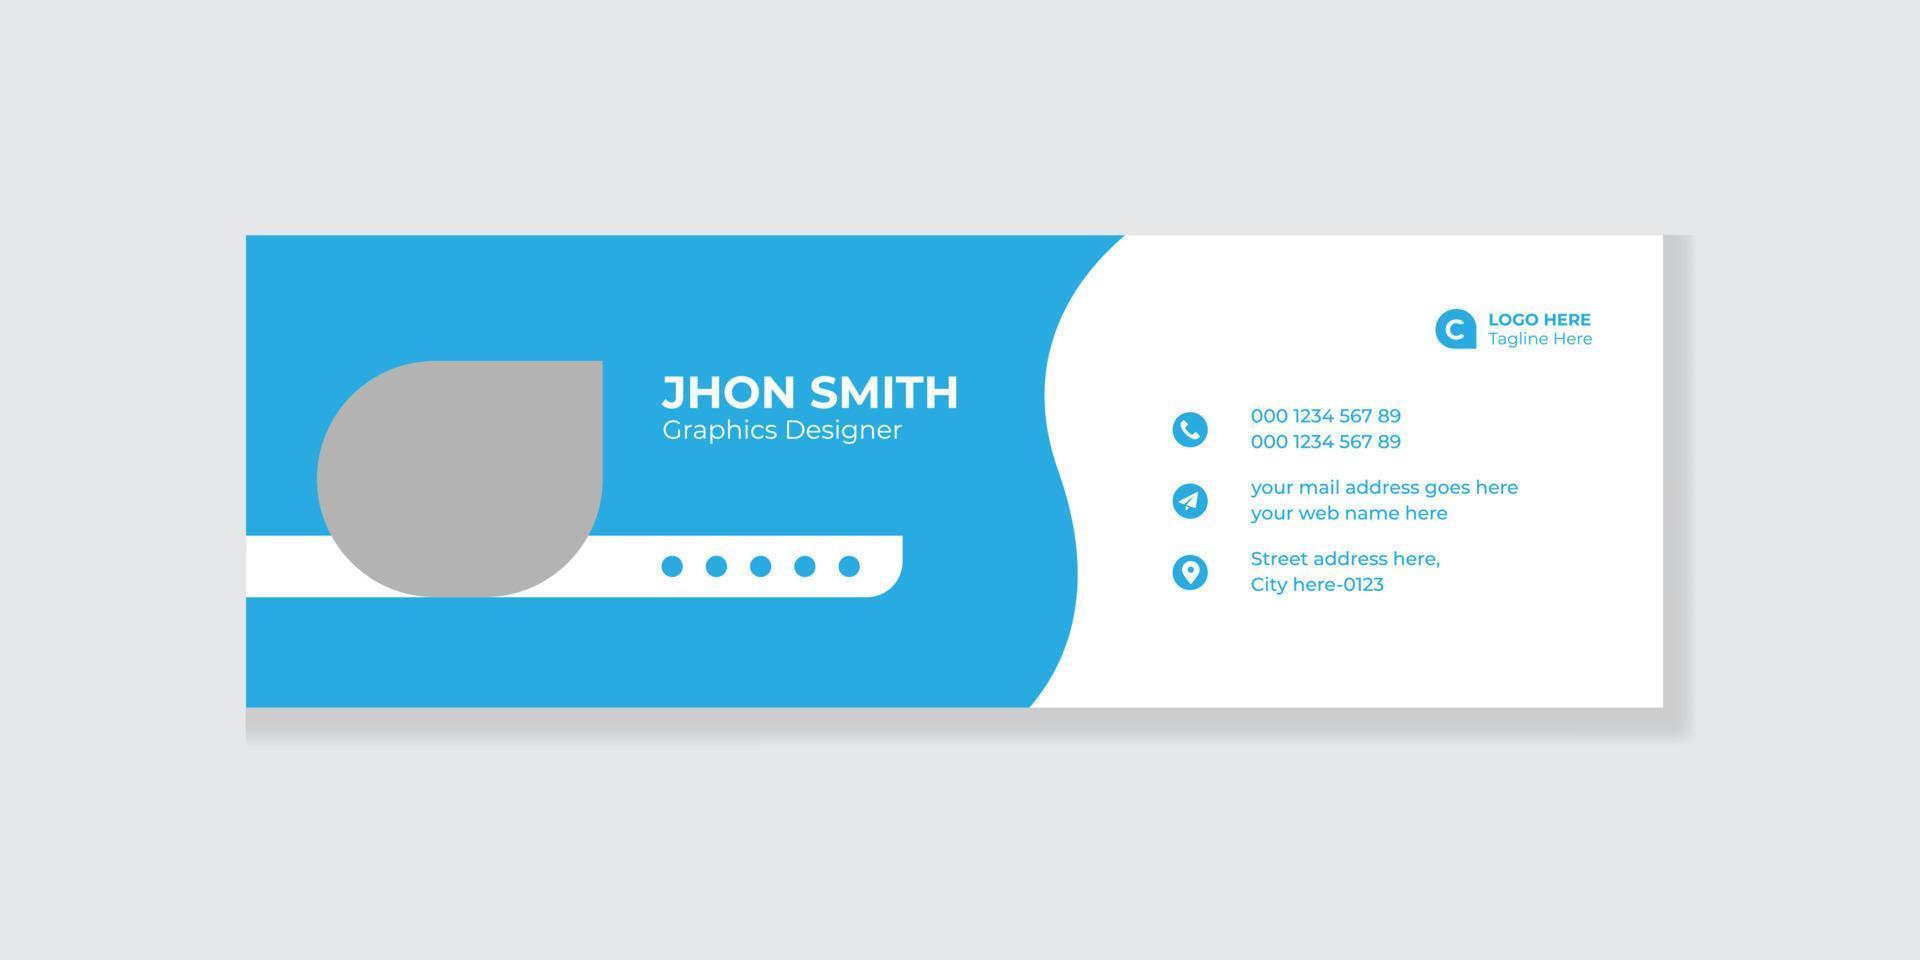 Email signature template or email footer and modern social media cover design vector